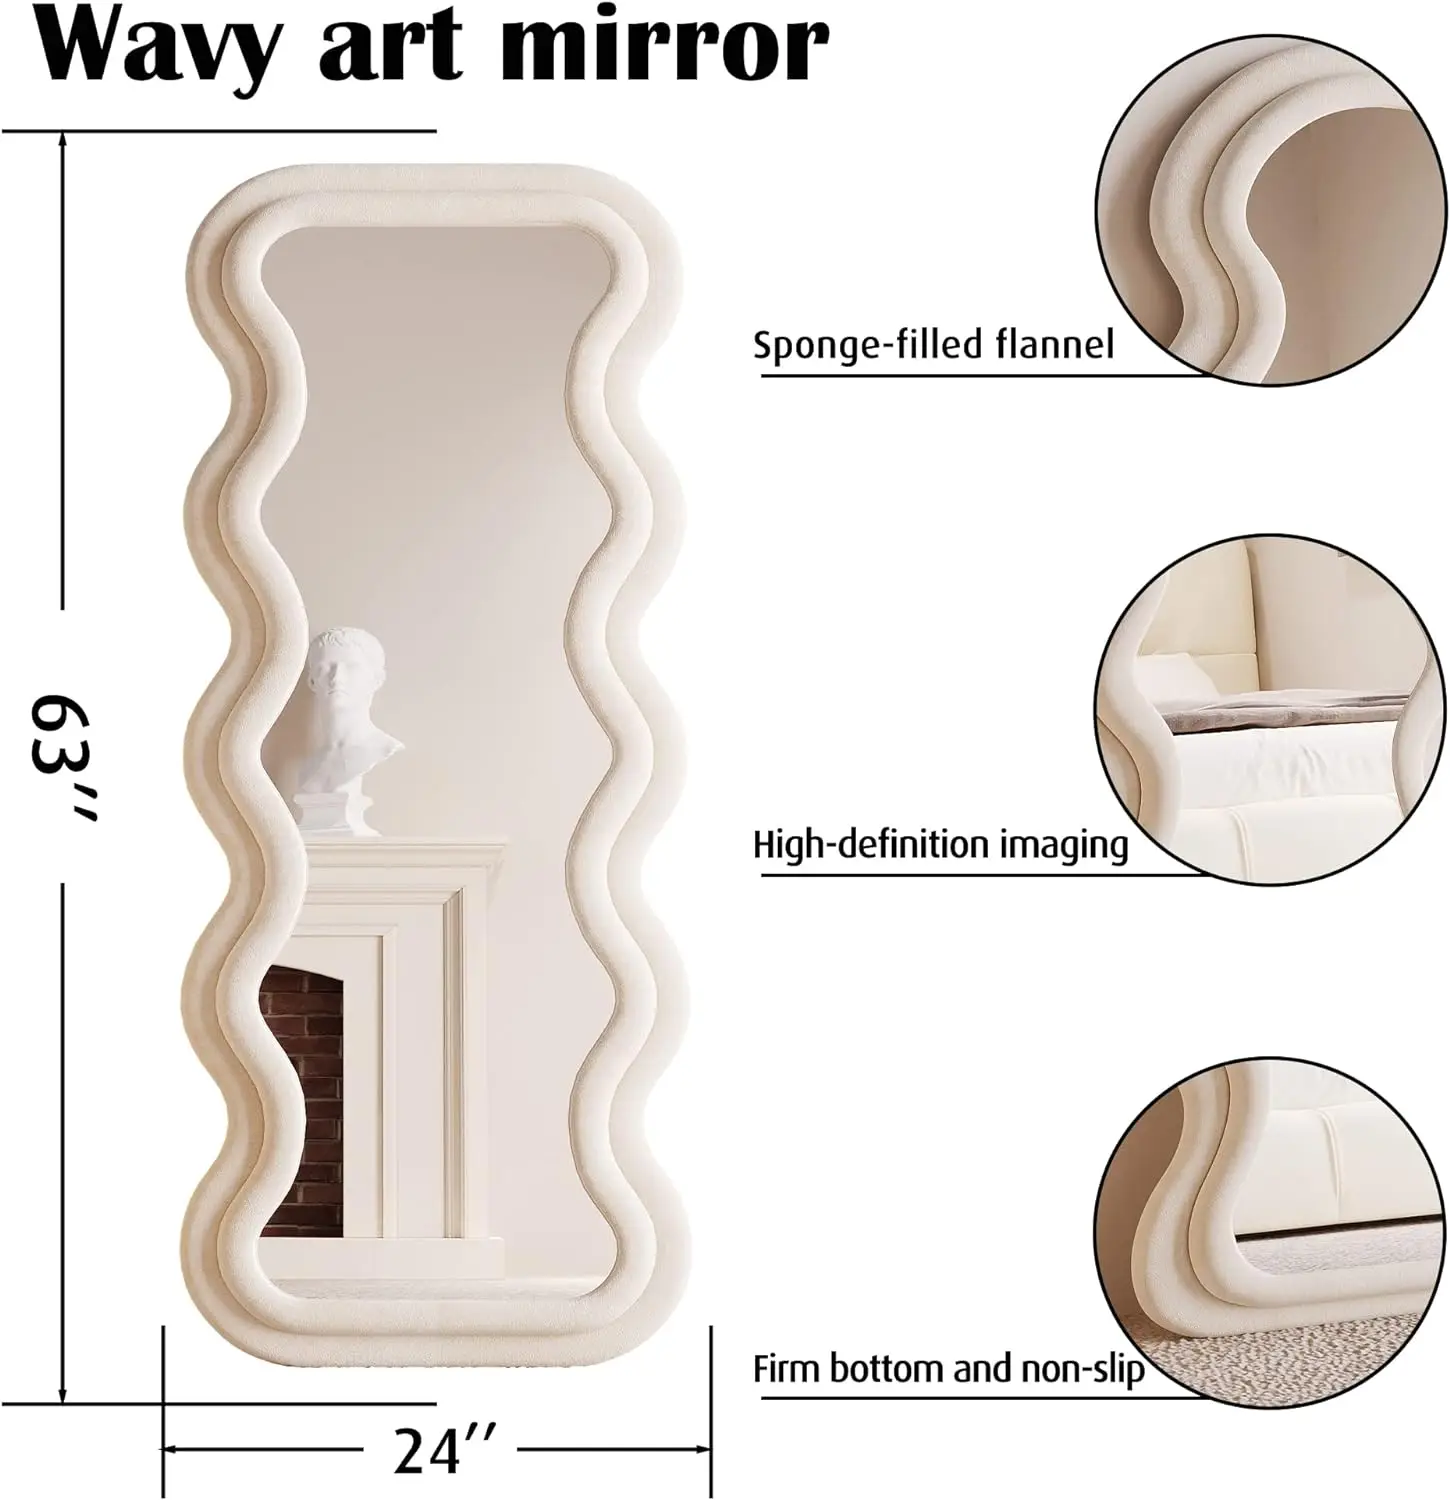 BOJOY Full Length Mirror , Irregular Wavy Mirror,Wall Mirror Standing Hanging or Leaning Against Wall for Bedroom,